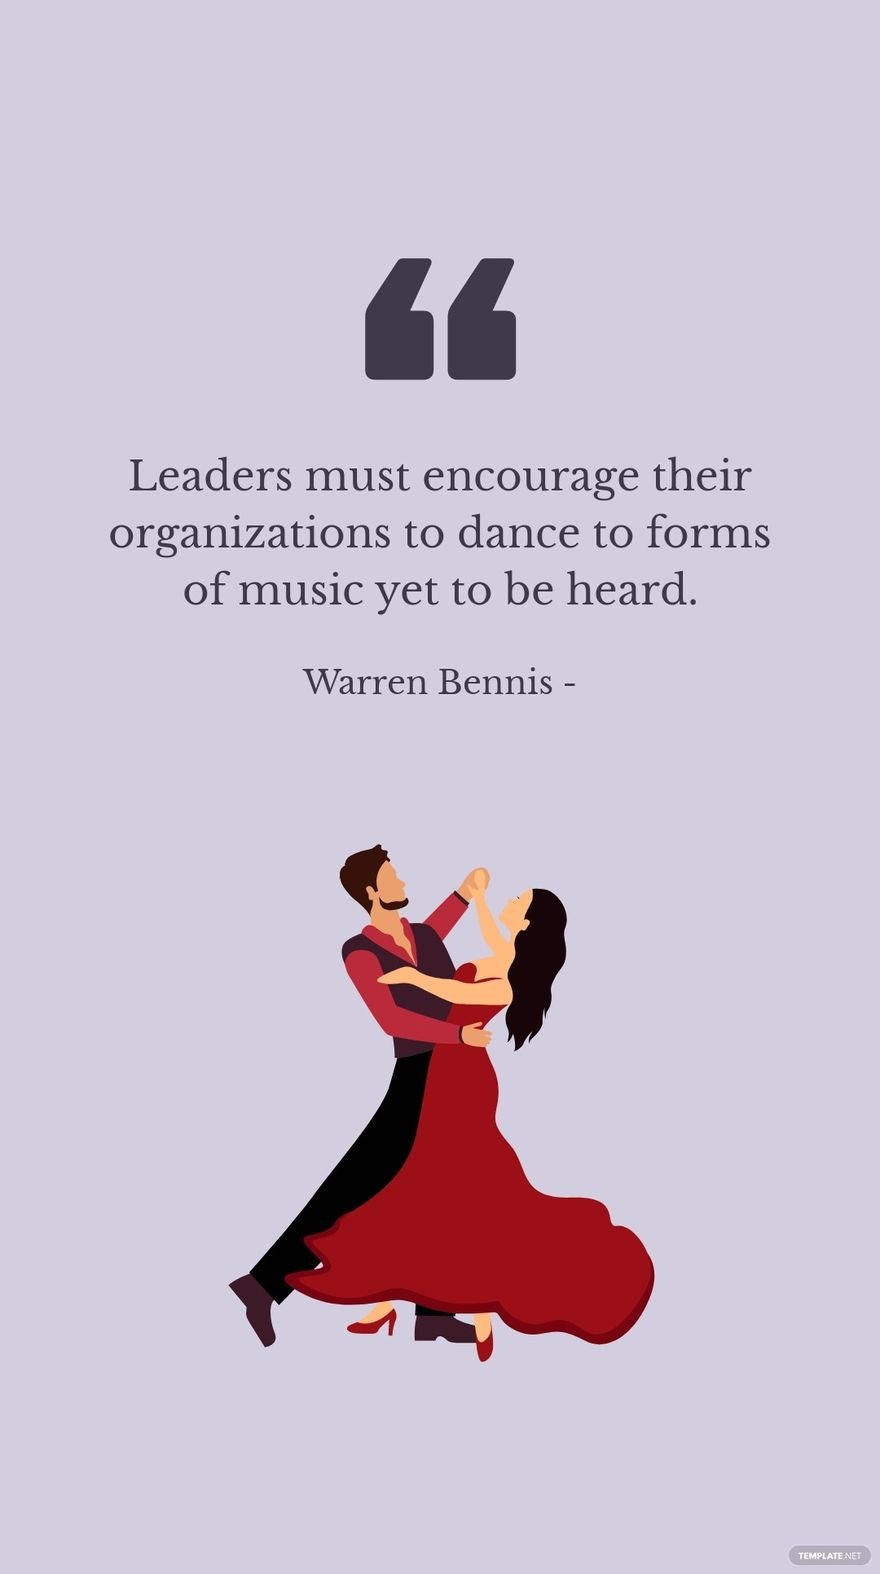 Warren Bennis - Leaders must encourage their organizations to dance to forms of music yet to be heard.